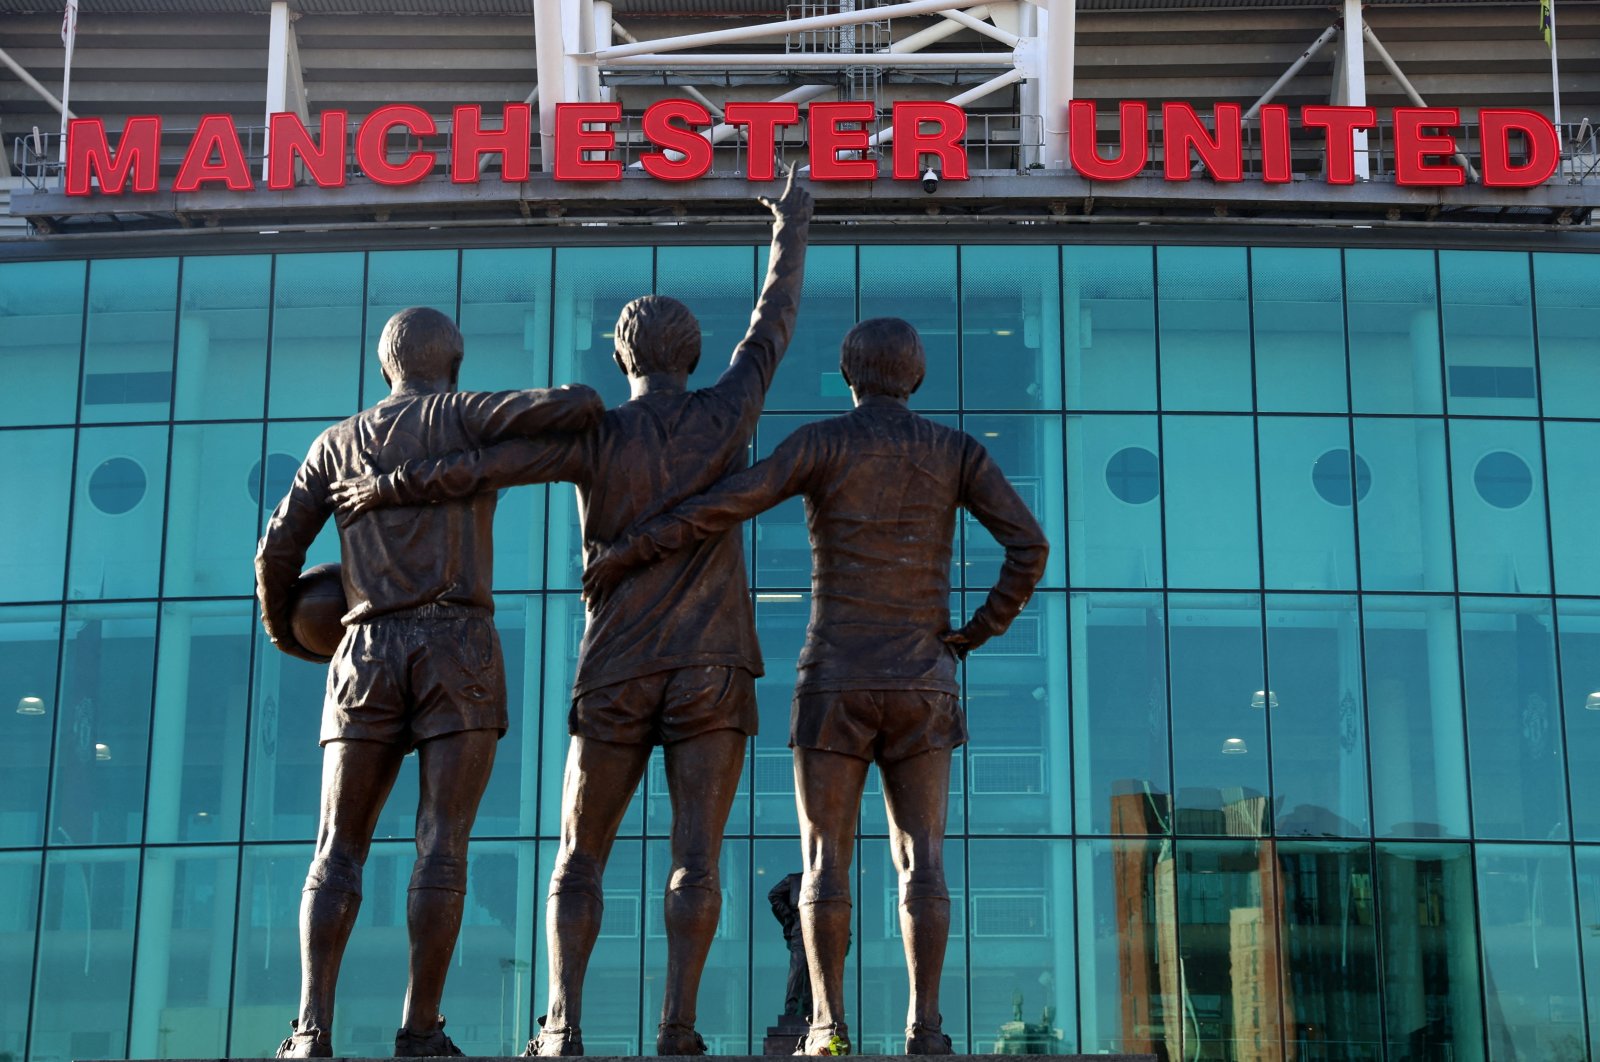 General view of the United Trinity statue outside Old Trafford, Manchester, England. (Reuters Photo)